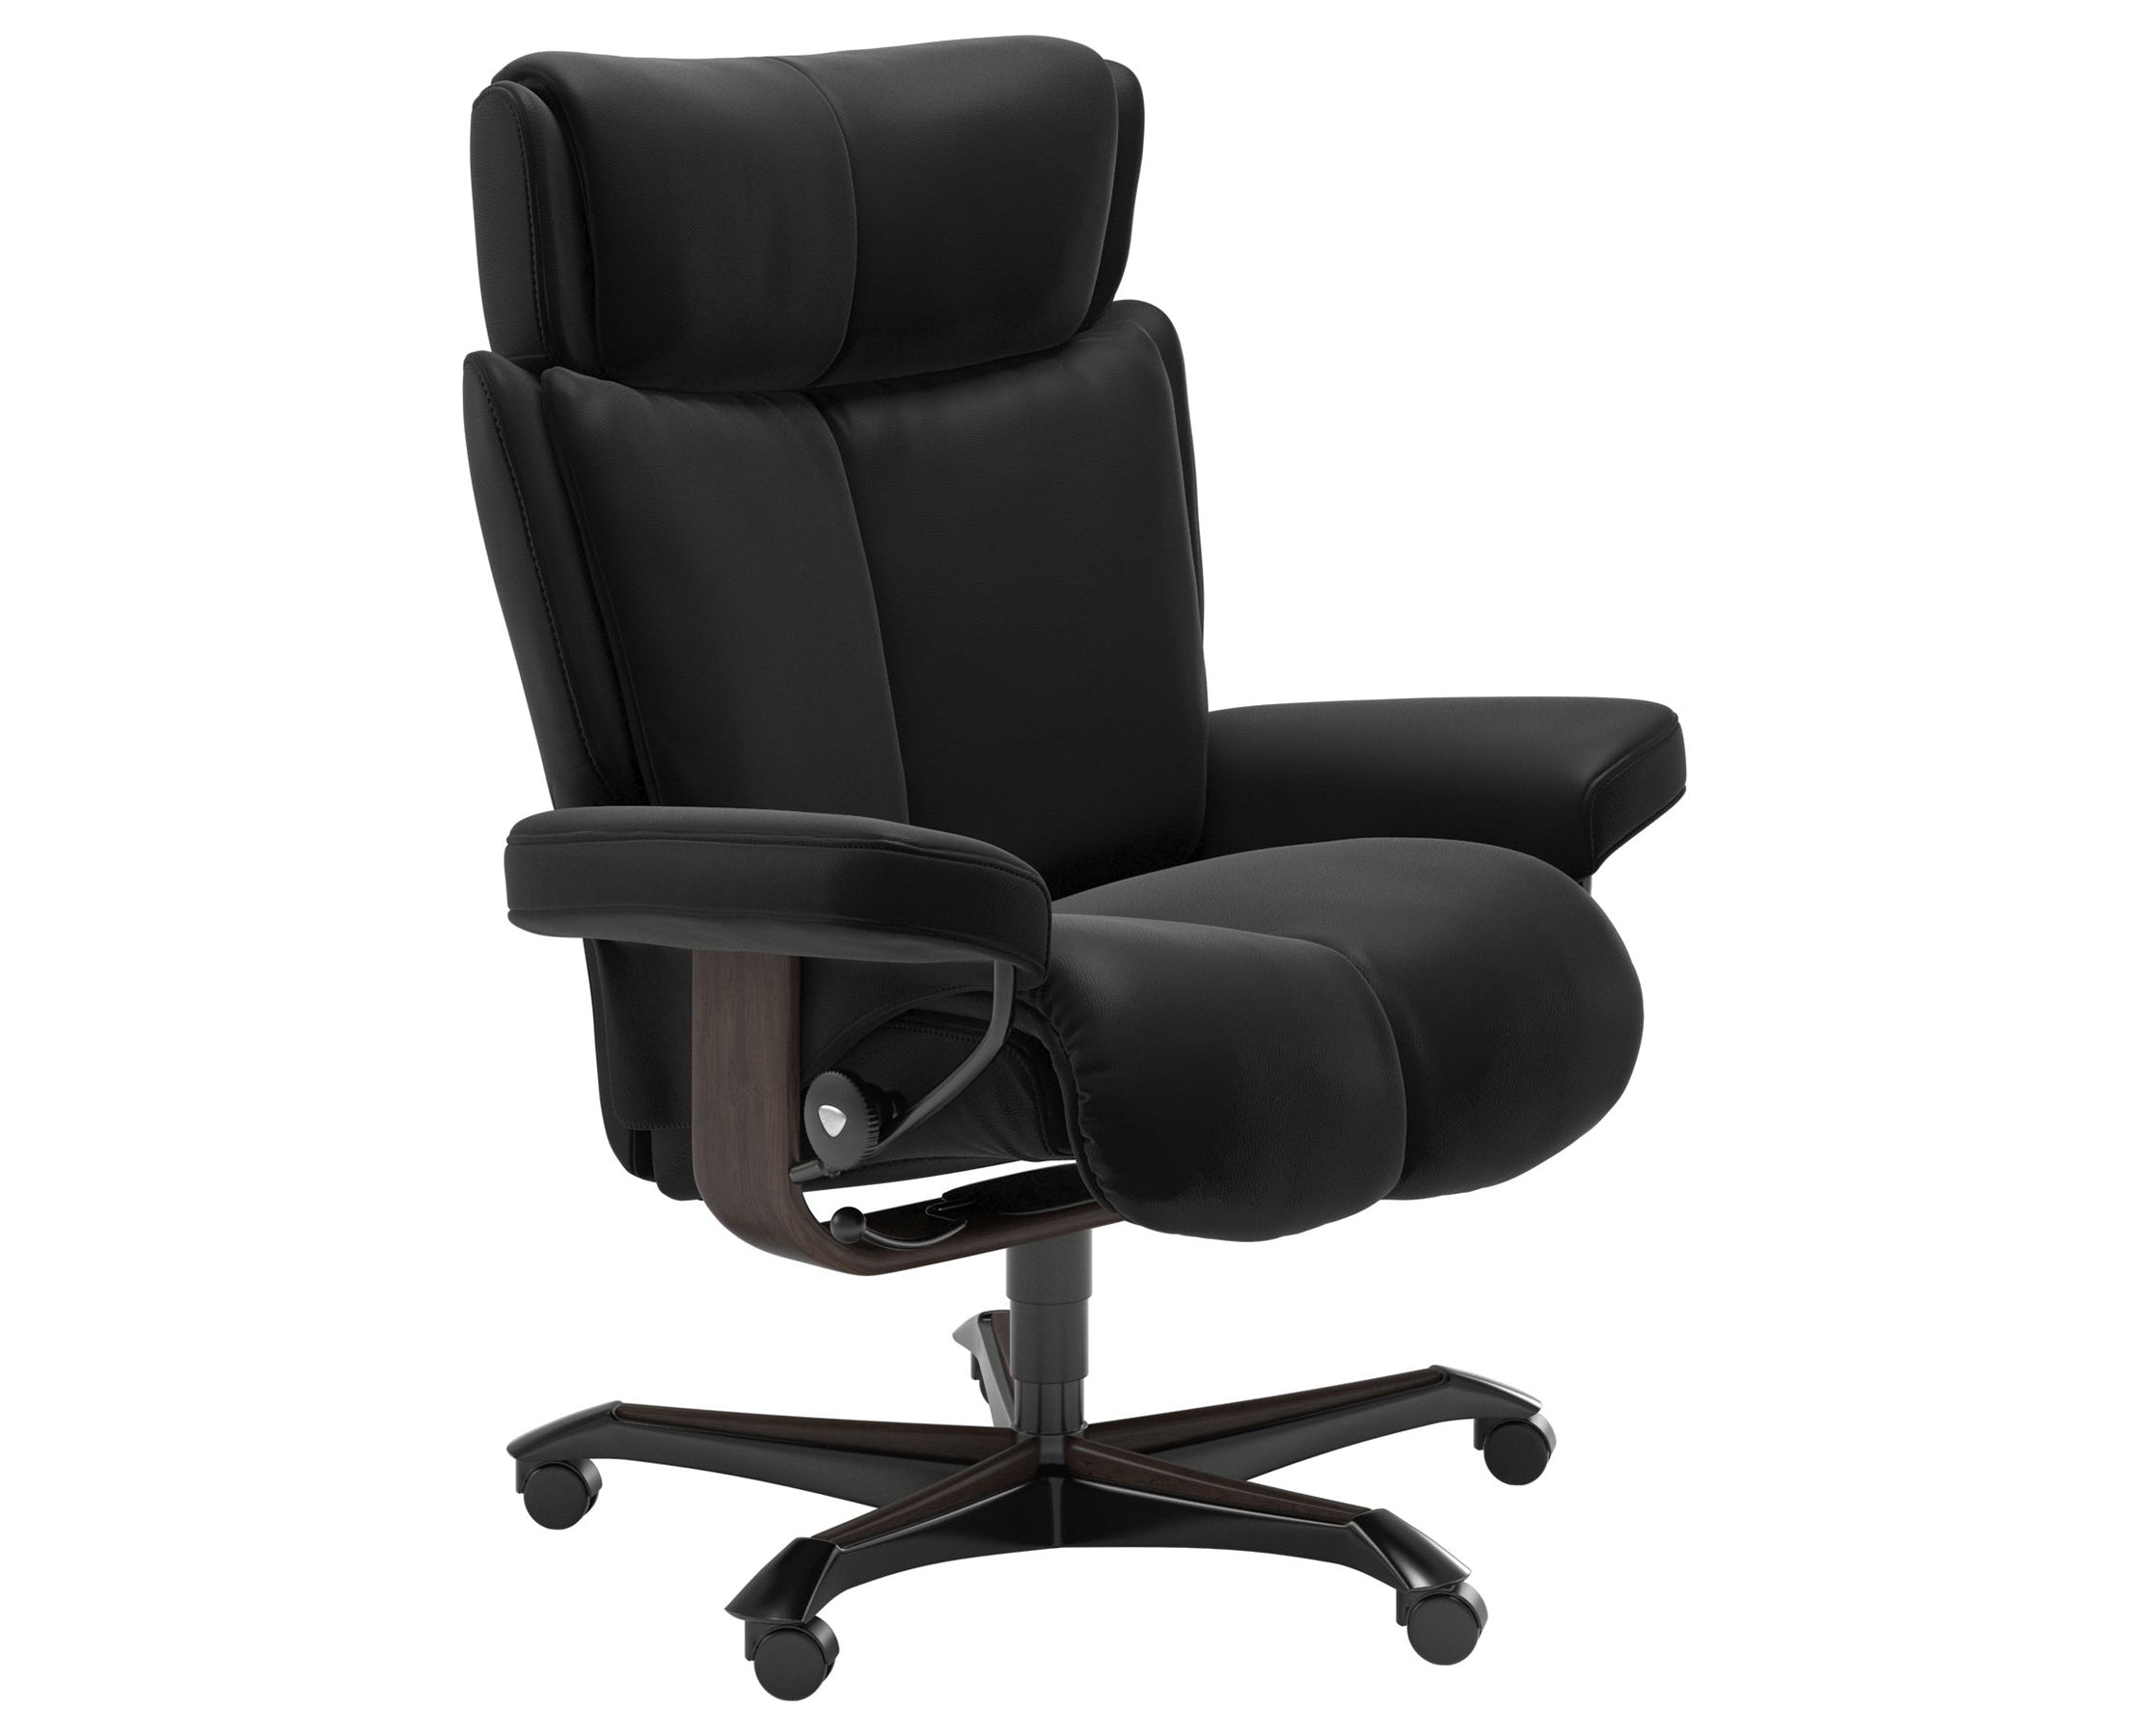 Paloma Leather Black M and Wenge Base | Stressless Magic Home Office Chair | Valley Ridge Furniture